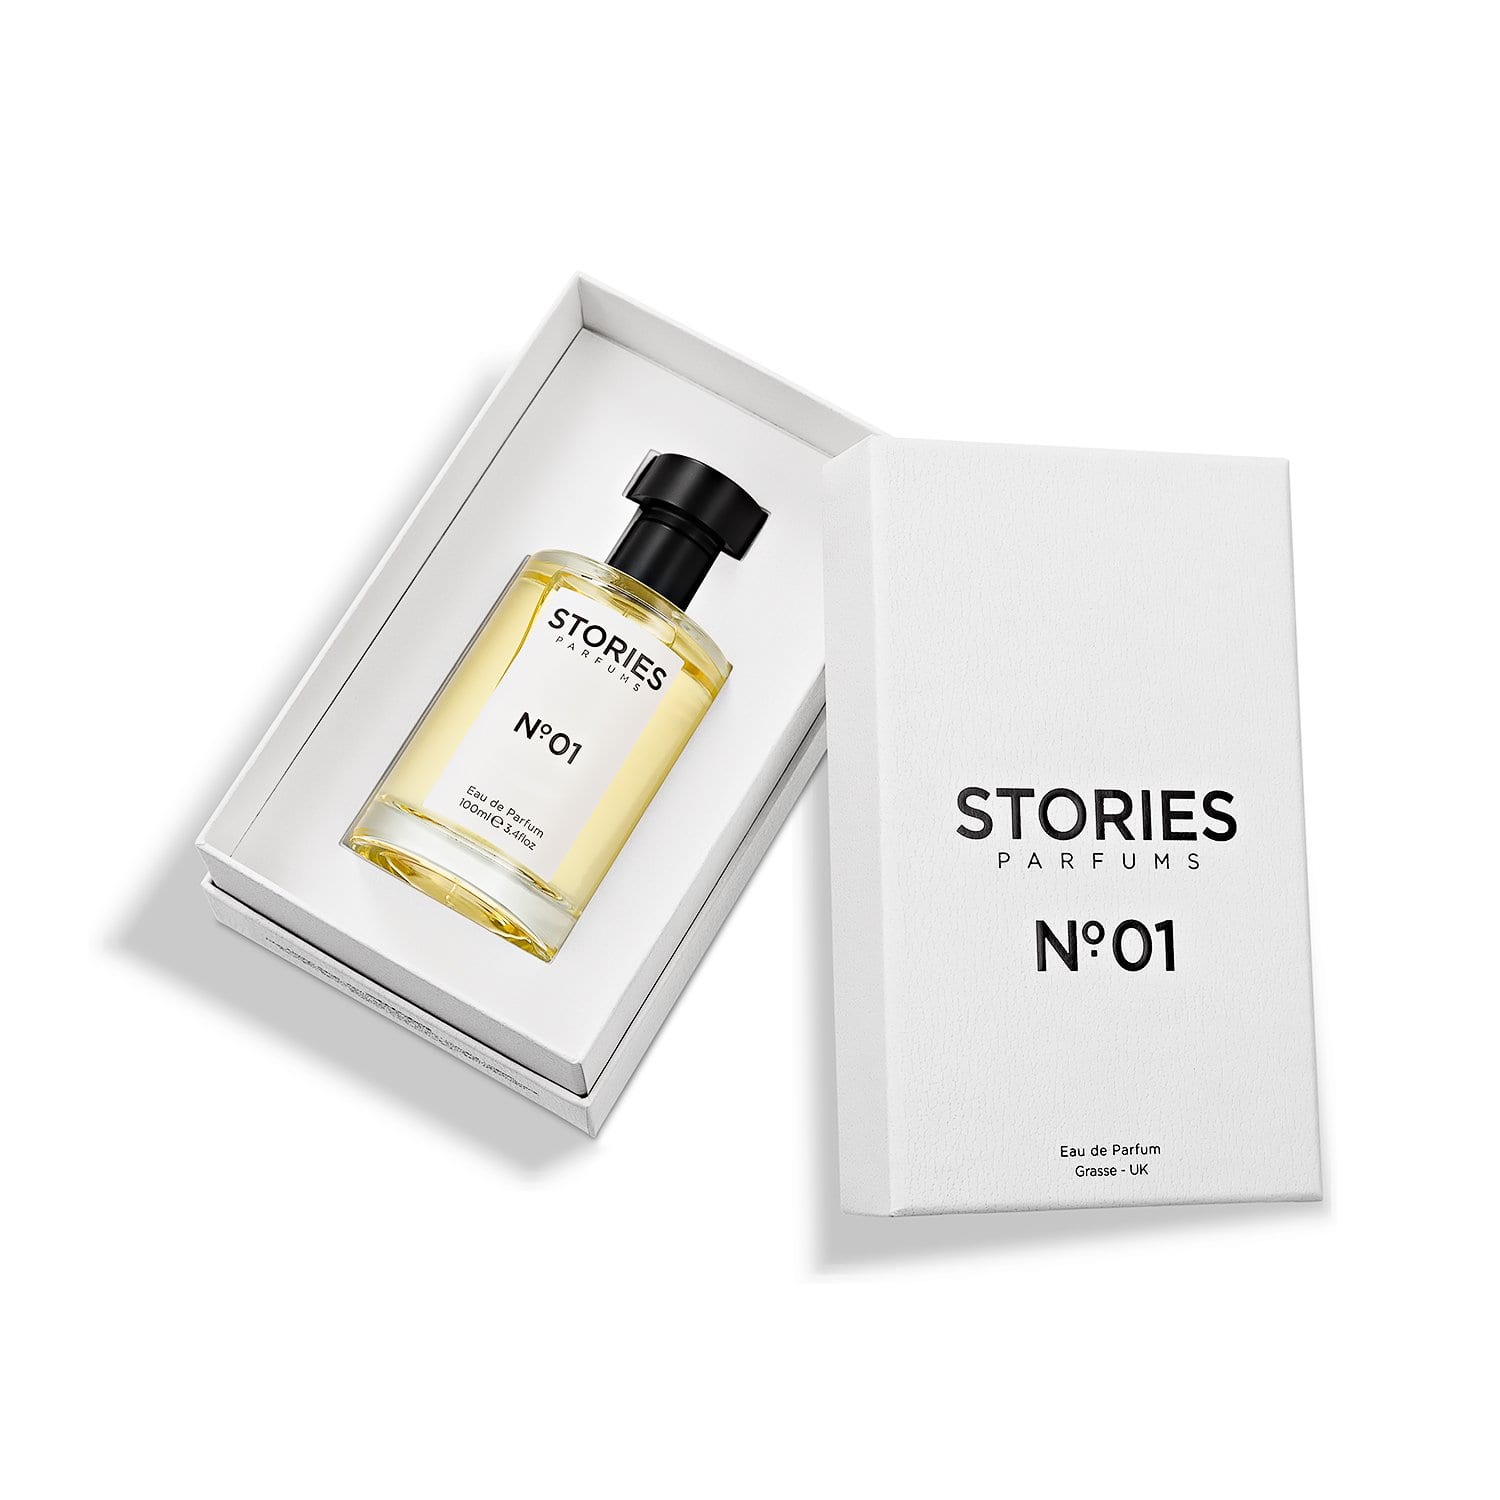 STORIES Parfums No.1 100ml Perfume Bottle in the Box